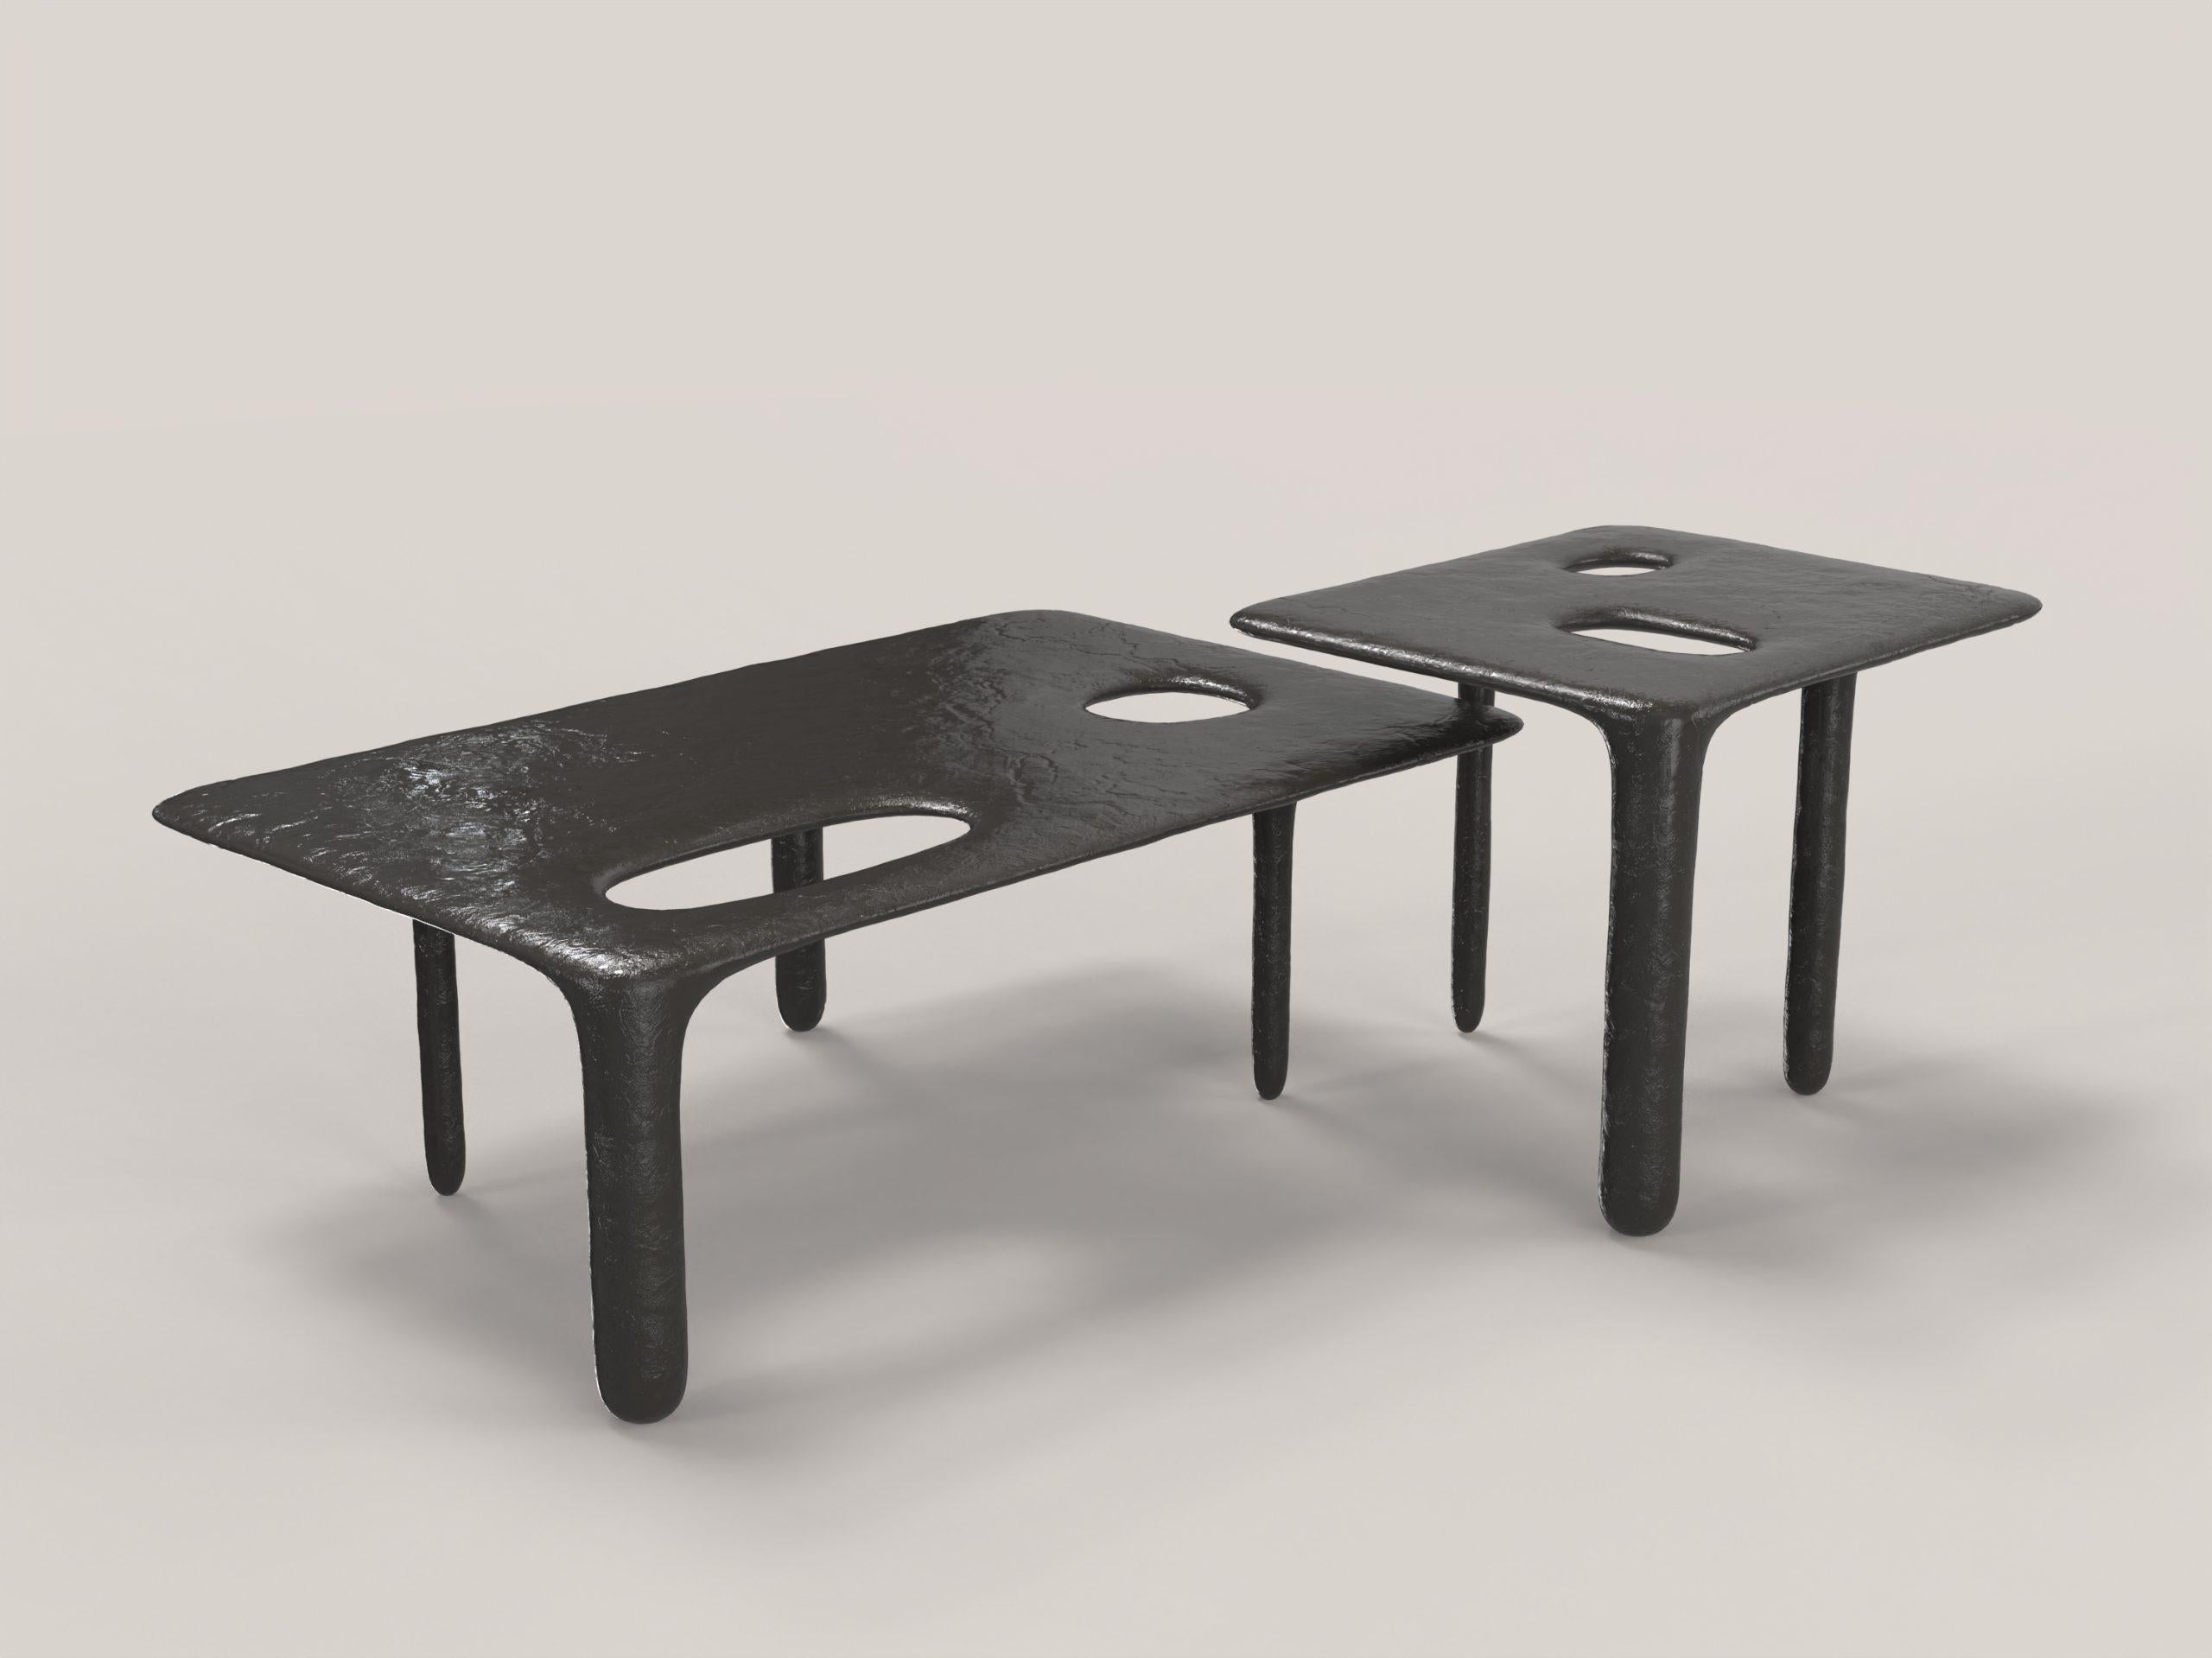 Set of 2 Oasi V1 and V2 Low Tables by Edizione Limitata
Limited Edition of 15 + 3 pieces (each). Signed and numbered.
Dimensions: V1: D 38 x W 45 x H 36 cm. V2: D 50 x W 80 x H 28 cm.
Materials: Cast Bronze.

Edizione Limitata, that is to say